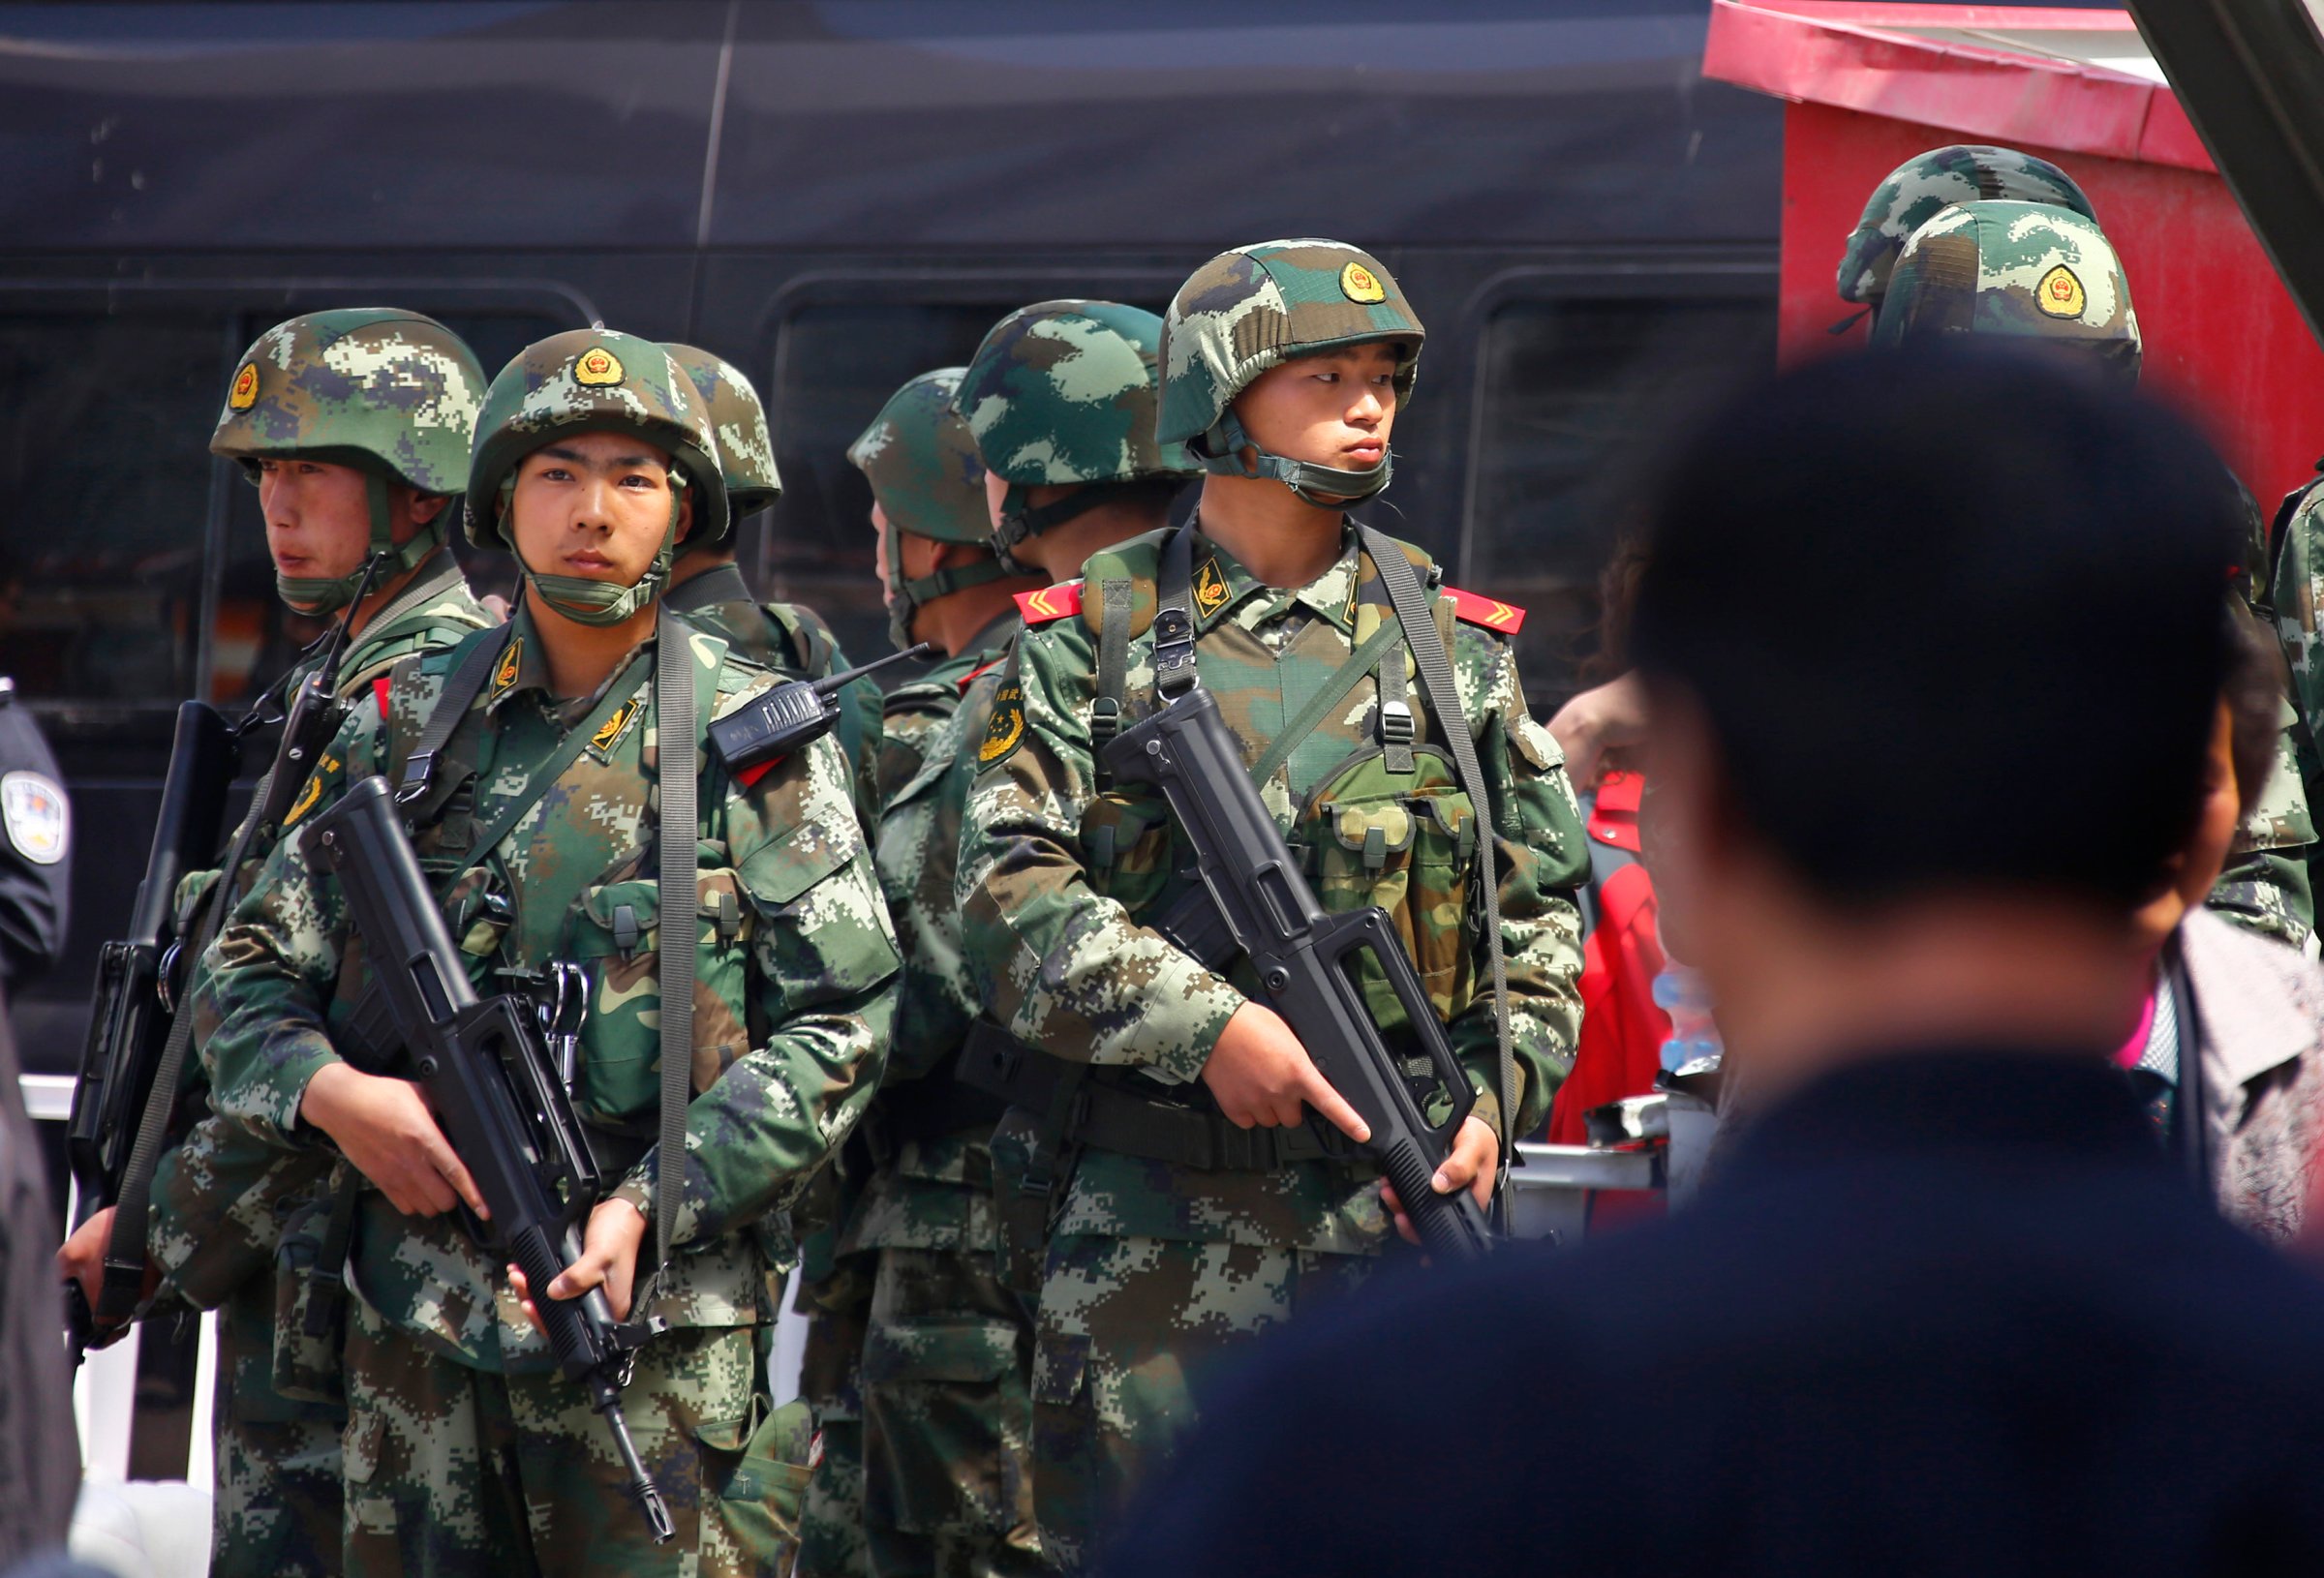 Paramilitary policemen stand guard near the exit of the South Railway Station in Urumqi, Xinjiang.